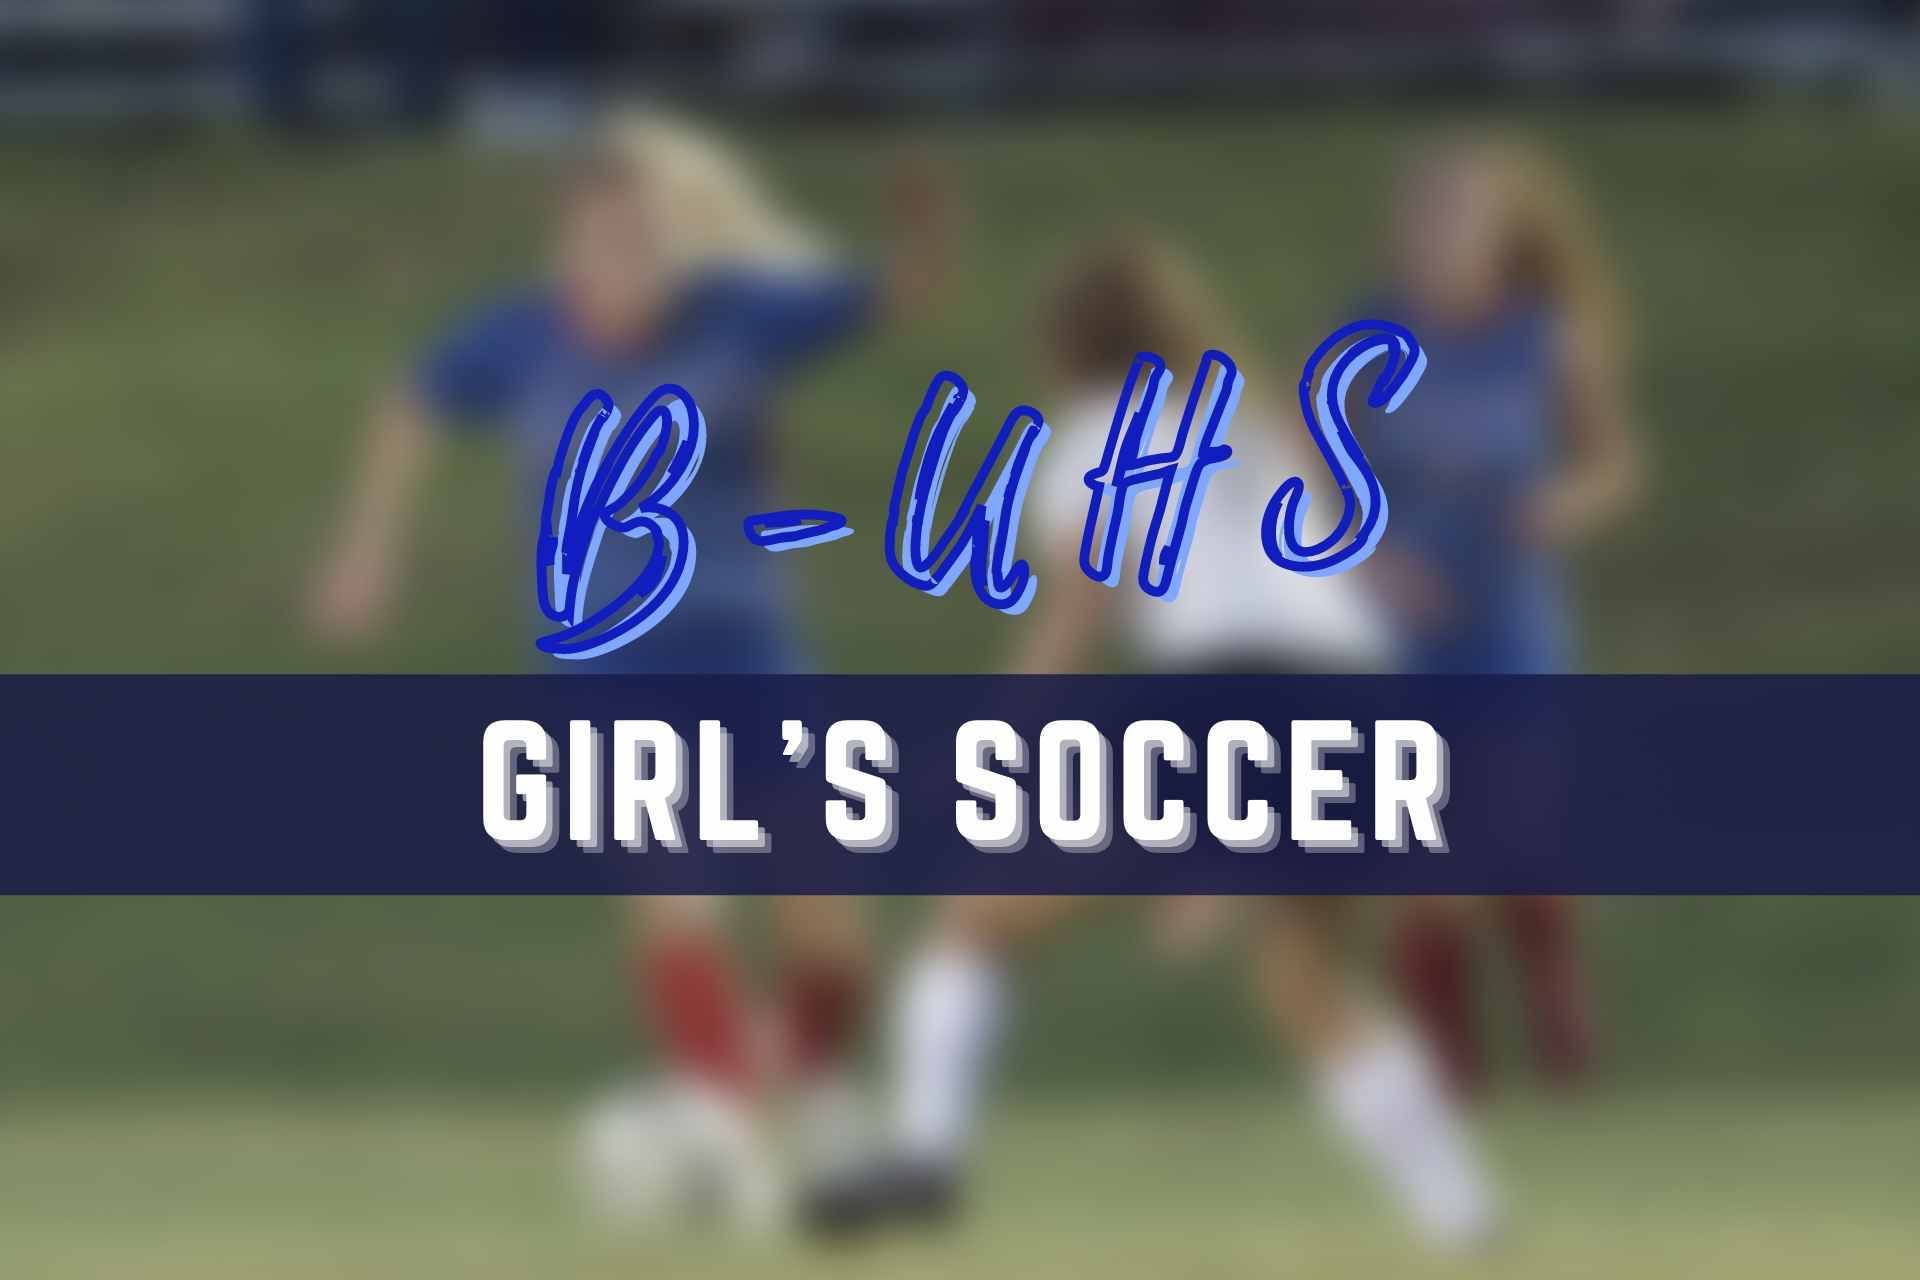 BUHS Girls Soccer Feature Image